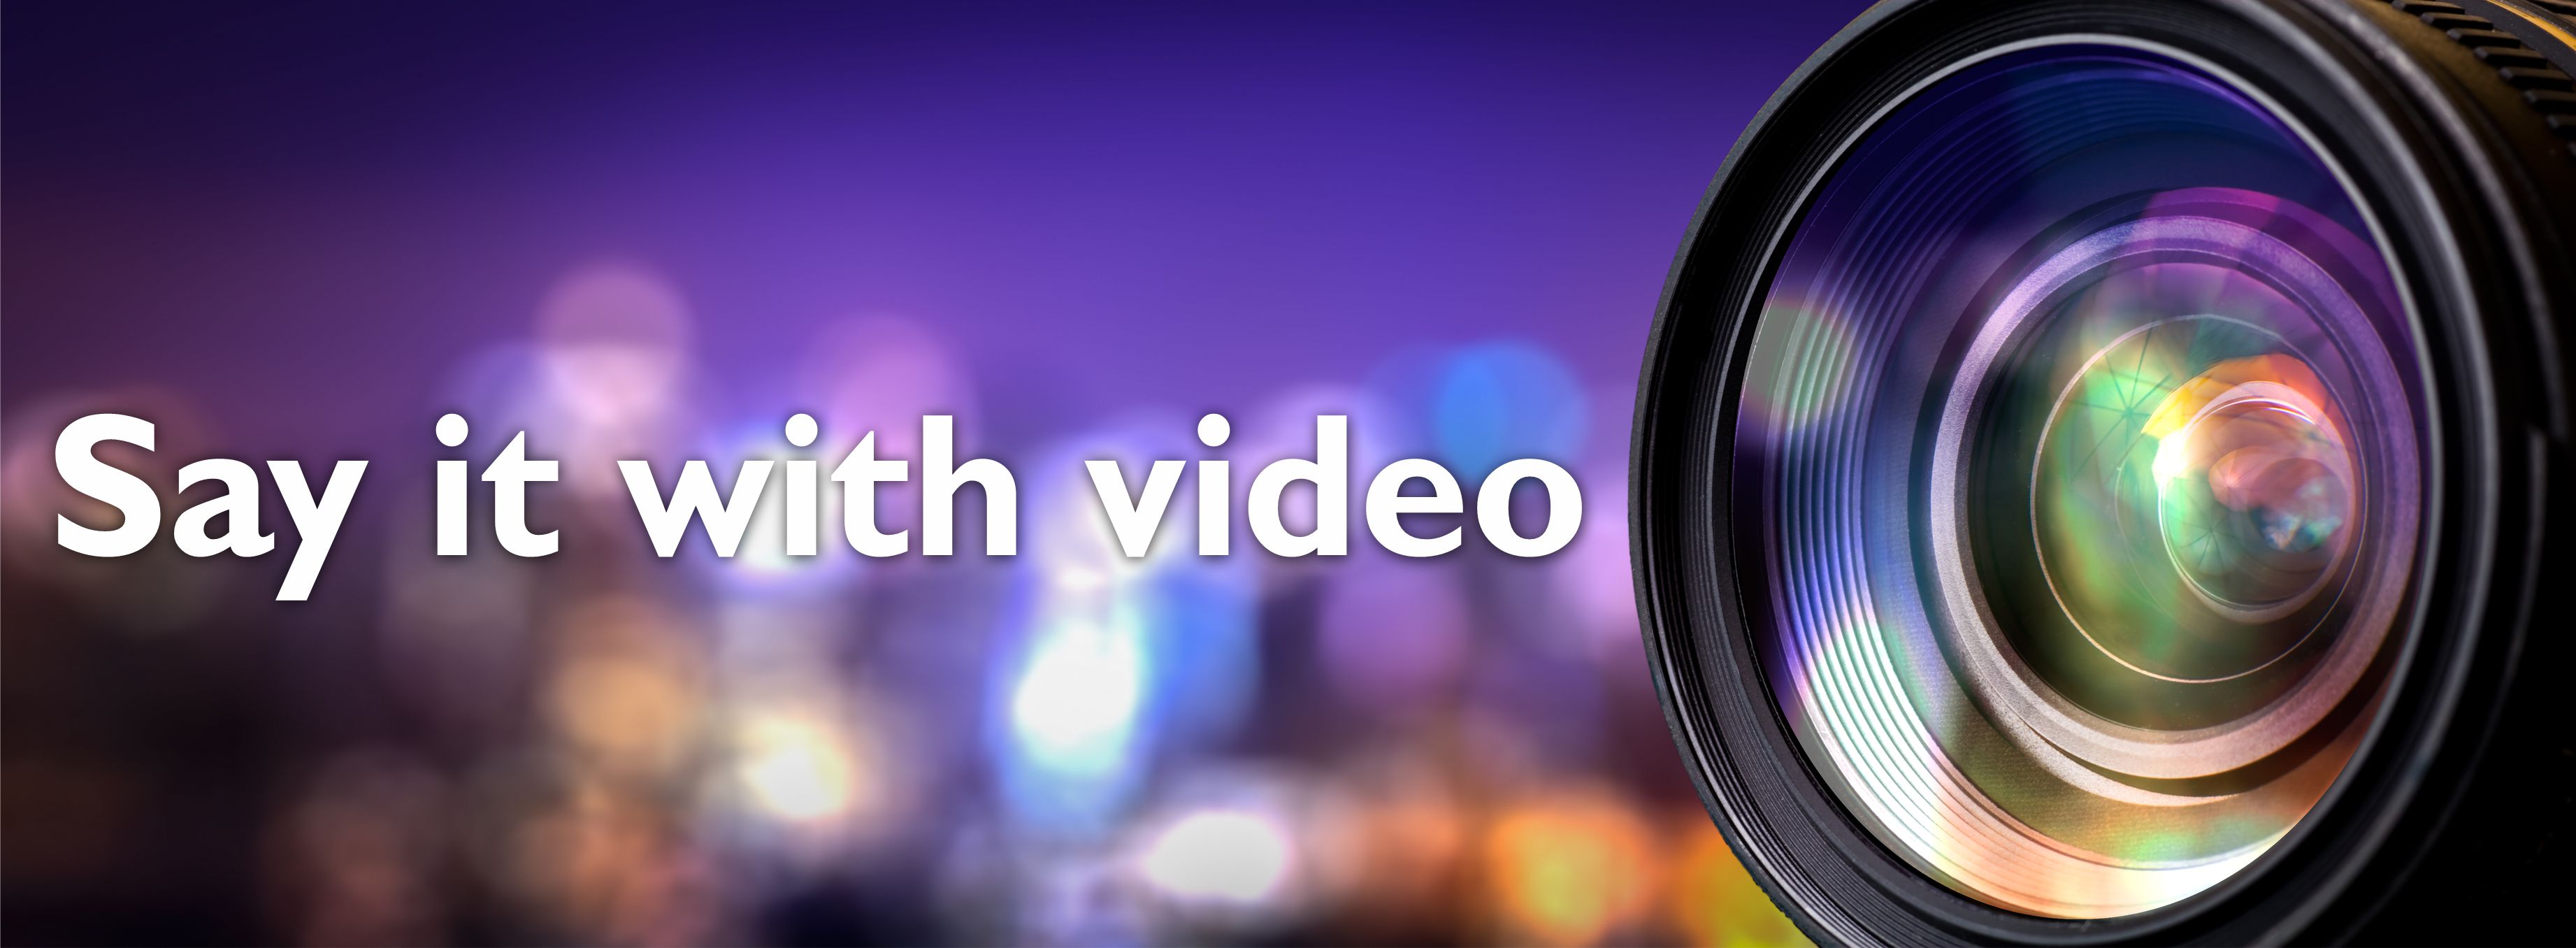 photo lens - say  it with video 